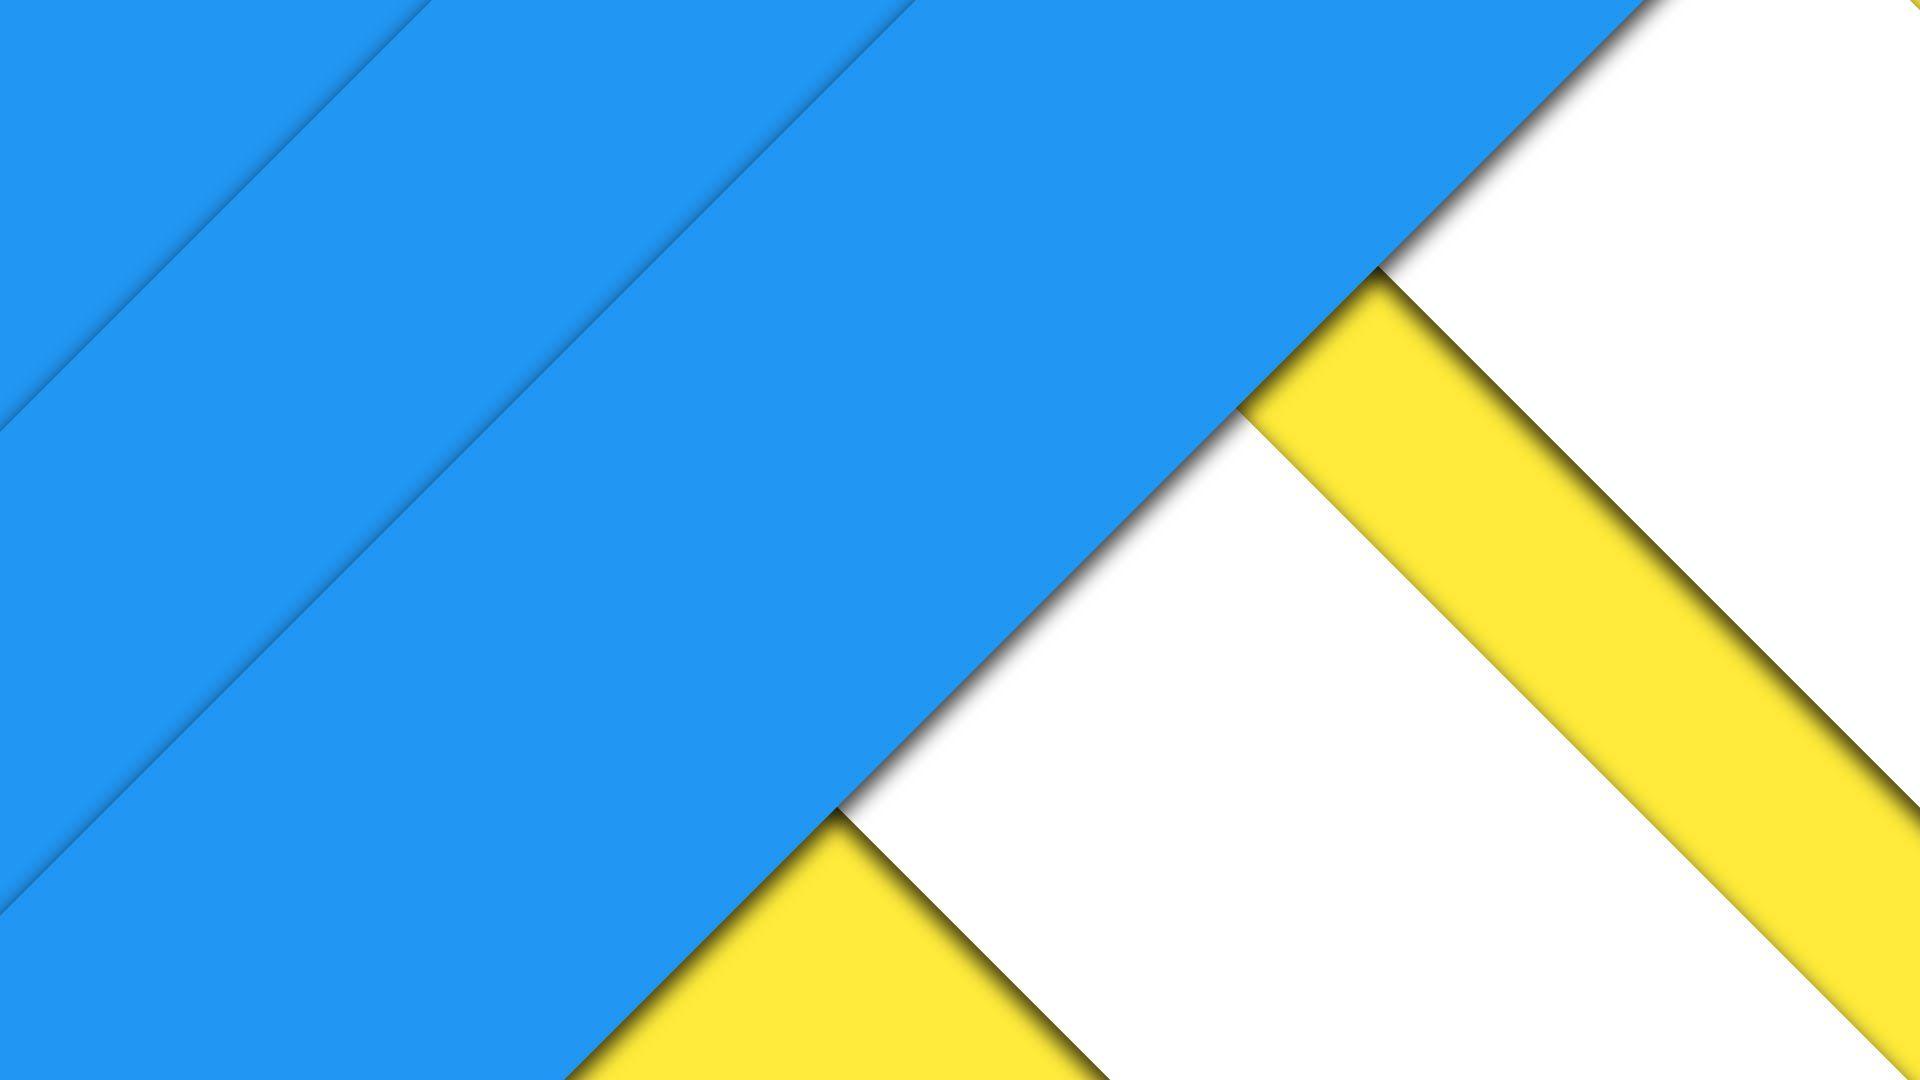 How To Create A Material Design Wallpaper Tutorial